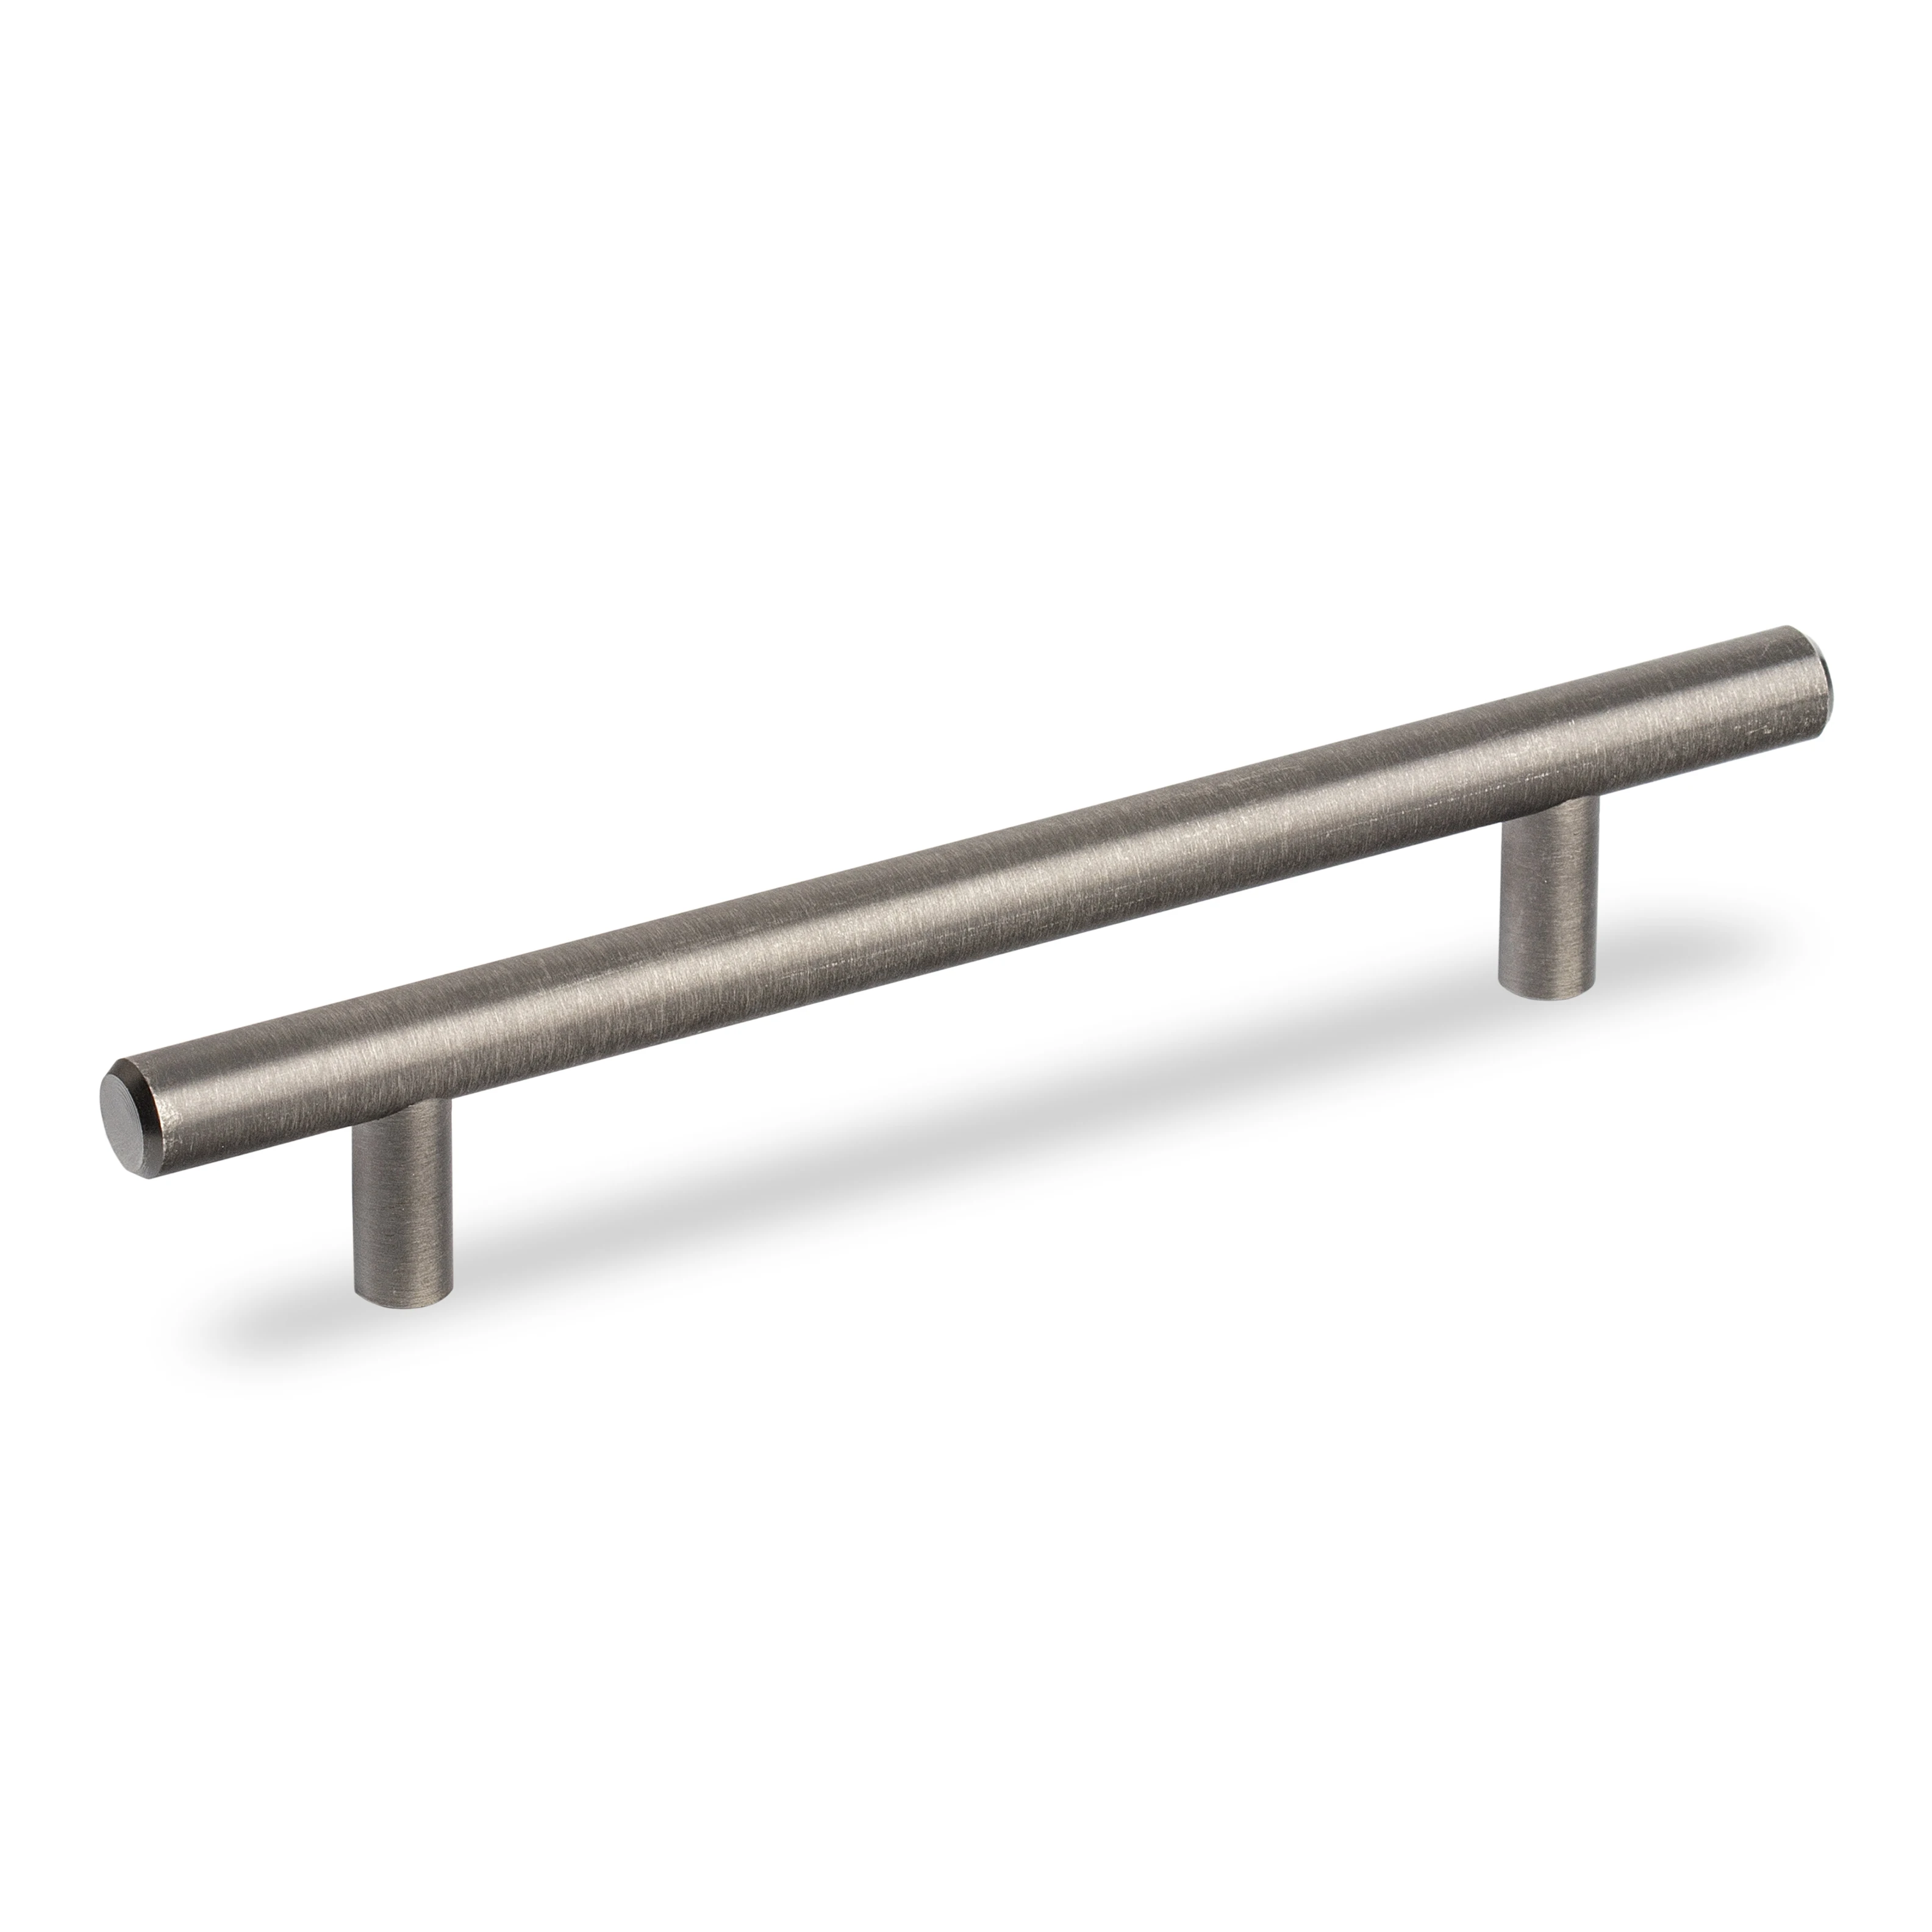 
New hardware cheap solid Steel decorative stainless bedroom kitchen furniture modern T bar door cabinet drawer pull handle 